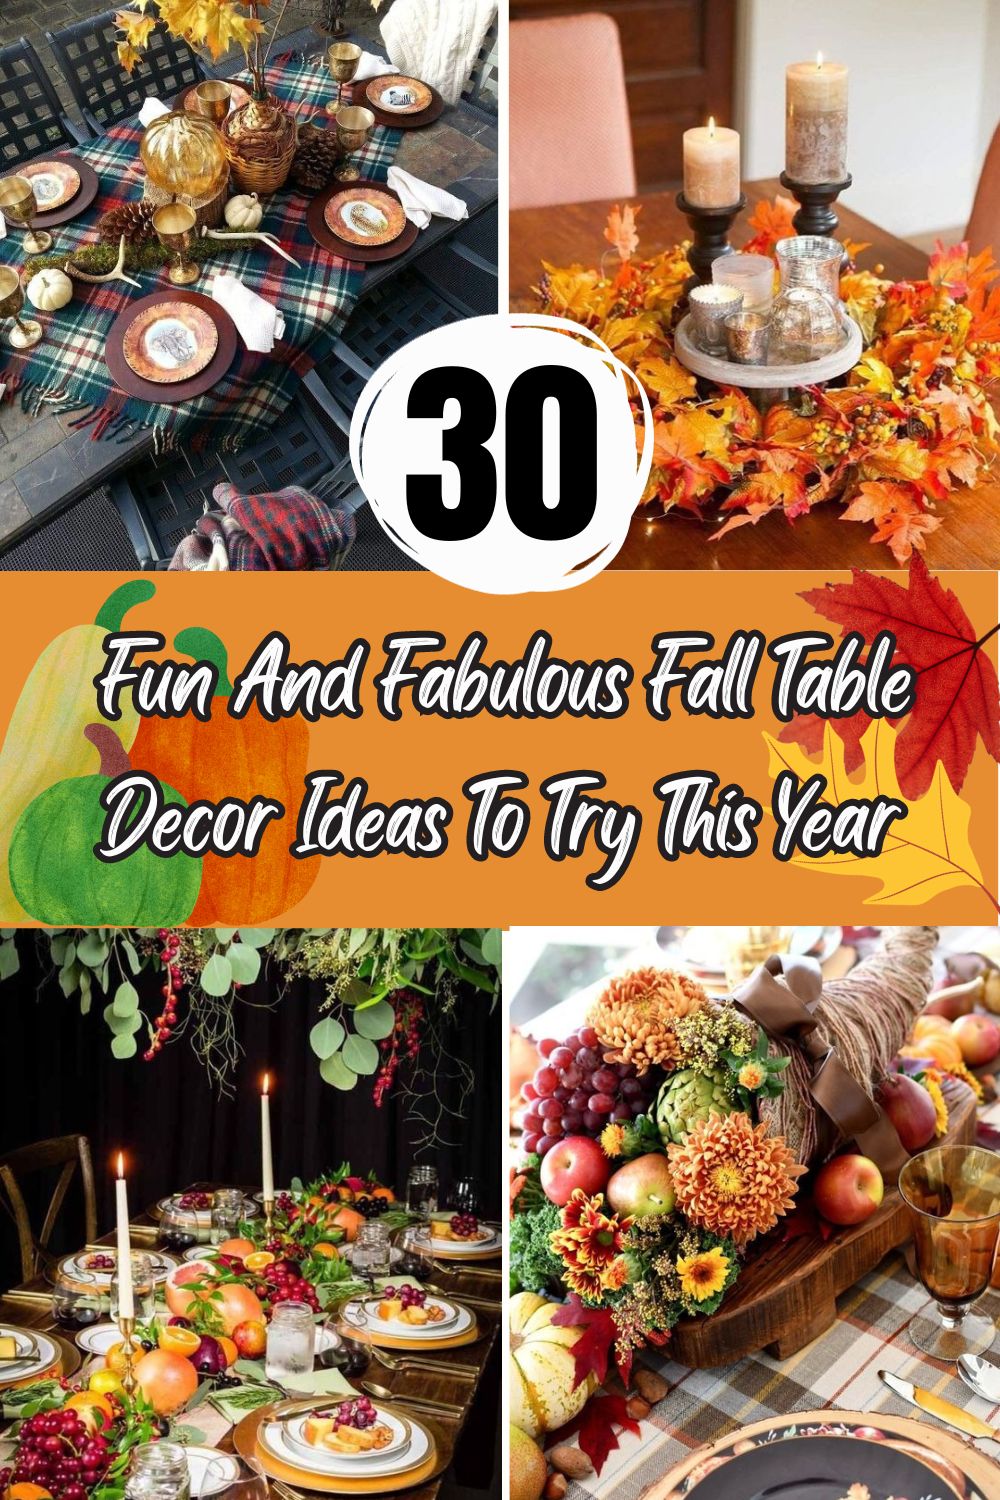 30 Fun And Fabulous Fall Table Decor Ideas To Try This Year